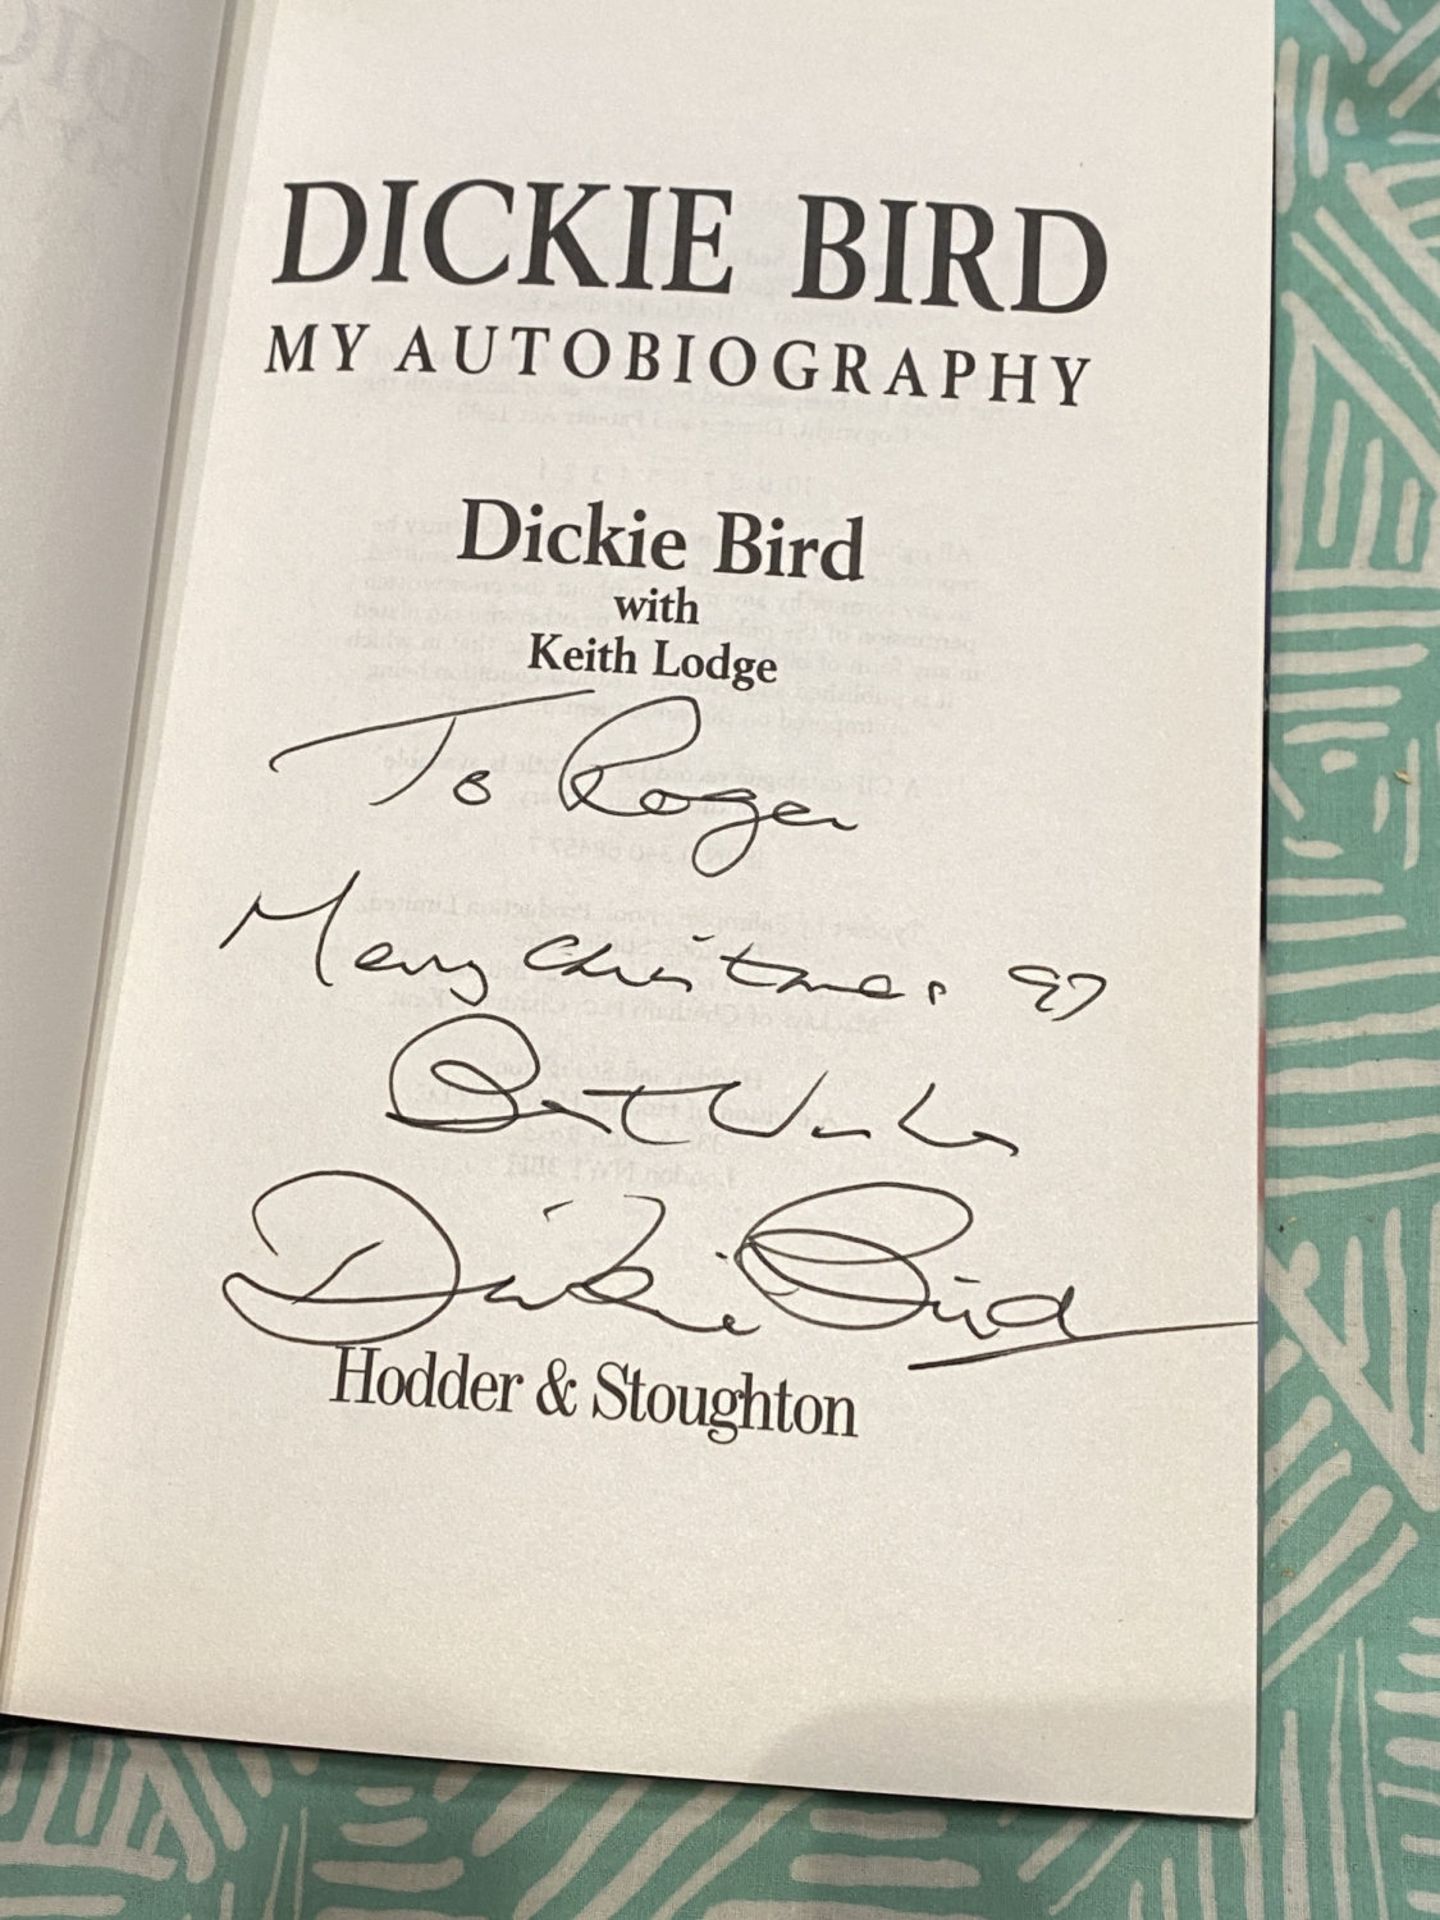 DICKIE BIRD SIGNED BOOK (COVER HAS DAMAGE) - Image 2 of 2